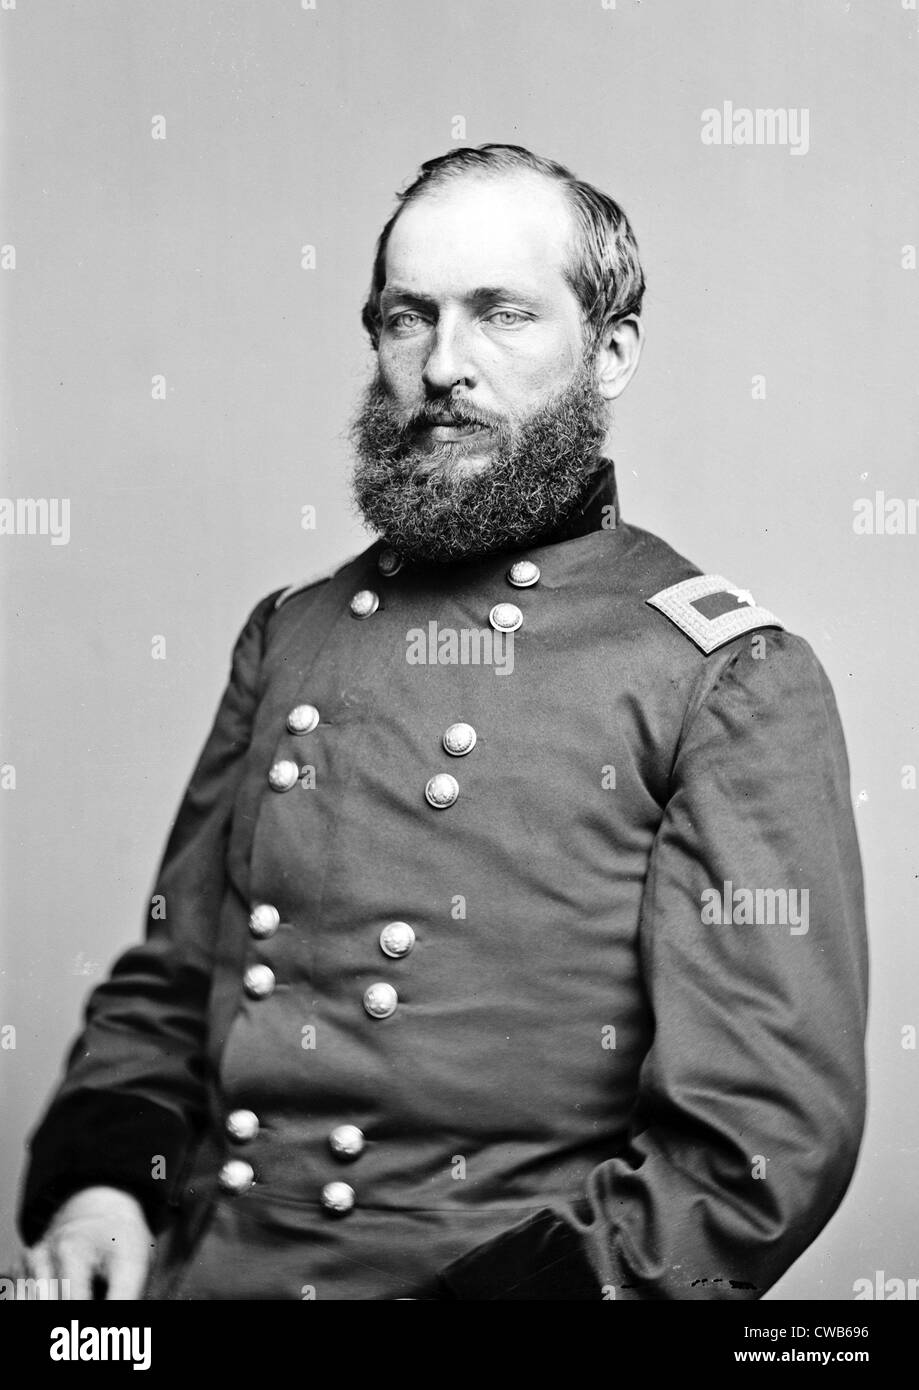 Brig. Gen. James A. Garfield, officer of the Federal Army, Sept. 19, 1863 Stock Photo